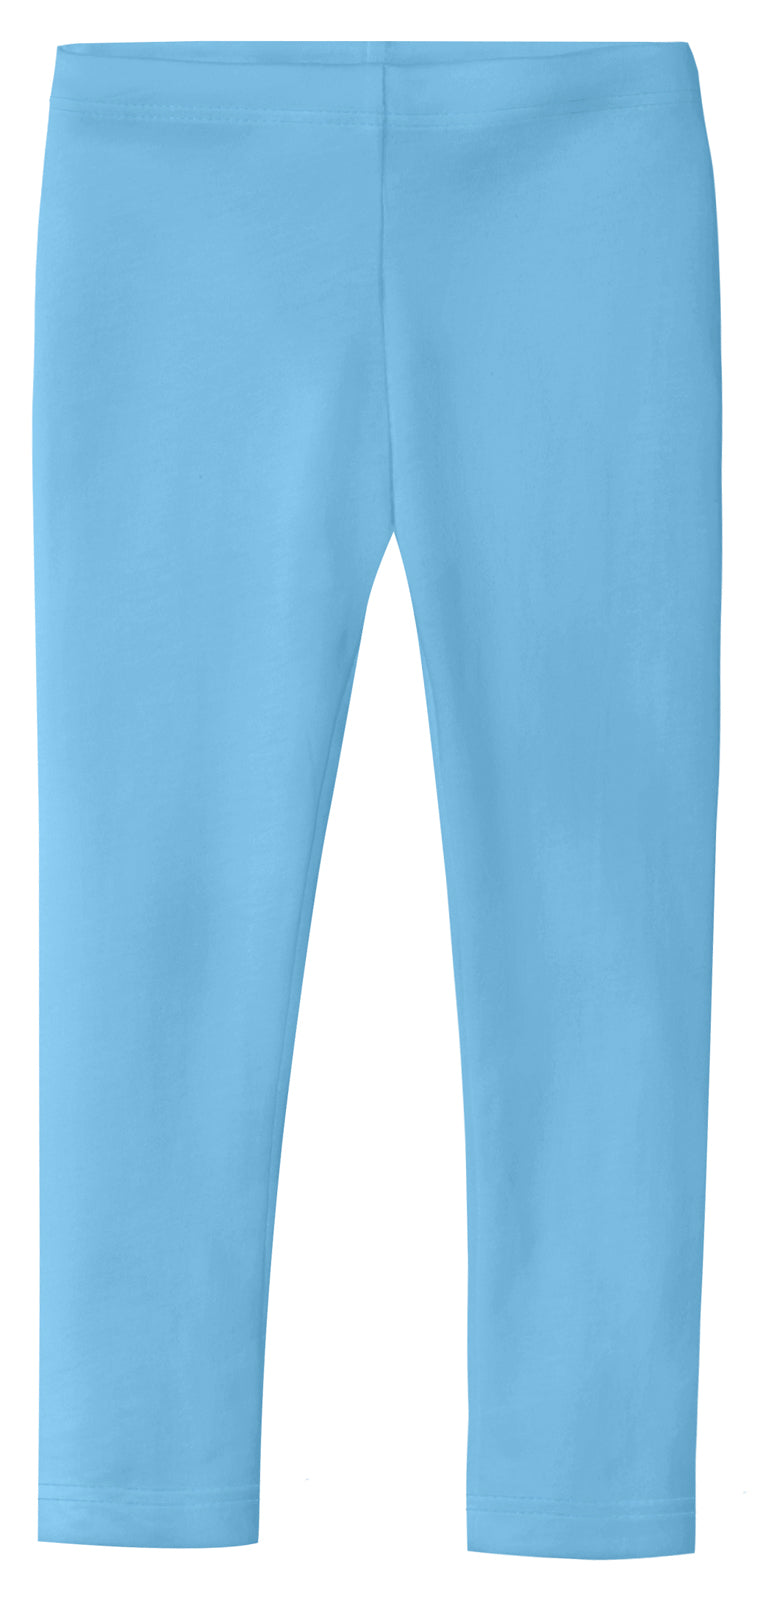 City Threads Girls' Leggings 100% Cotton for School Uniform Sports Coverage  or Play Perfect for Sensitive Skin or SPD Sensory Friendly Clothing, White,  9/12 mo.: Clothing, Shoes & Jewelry 